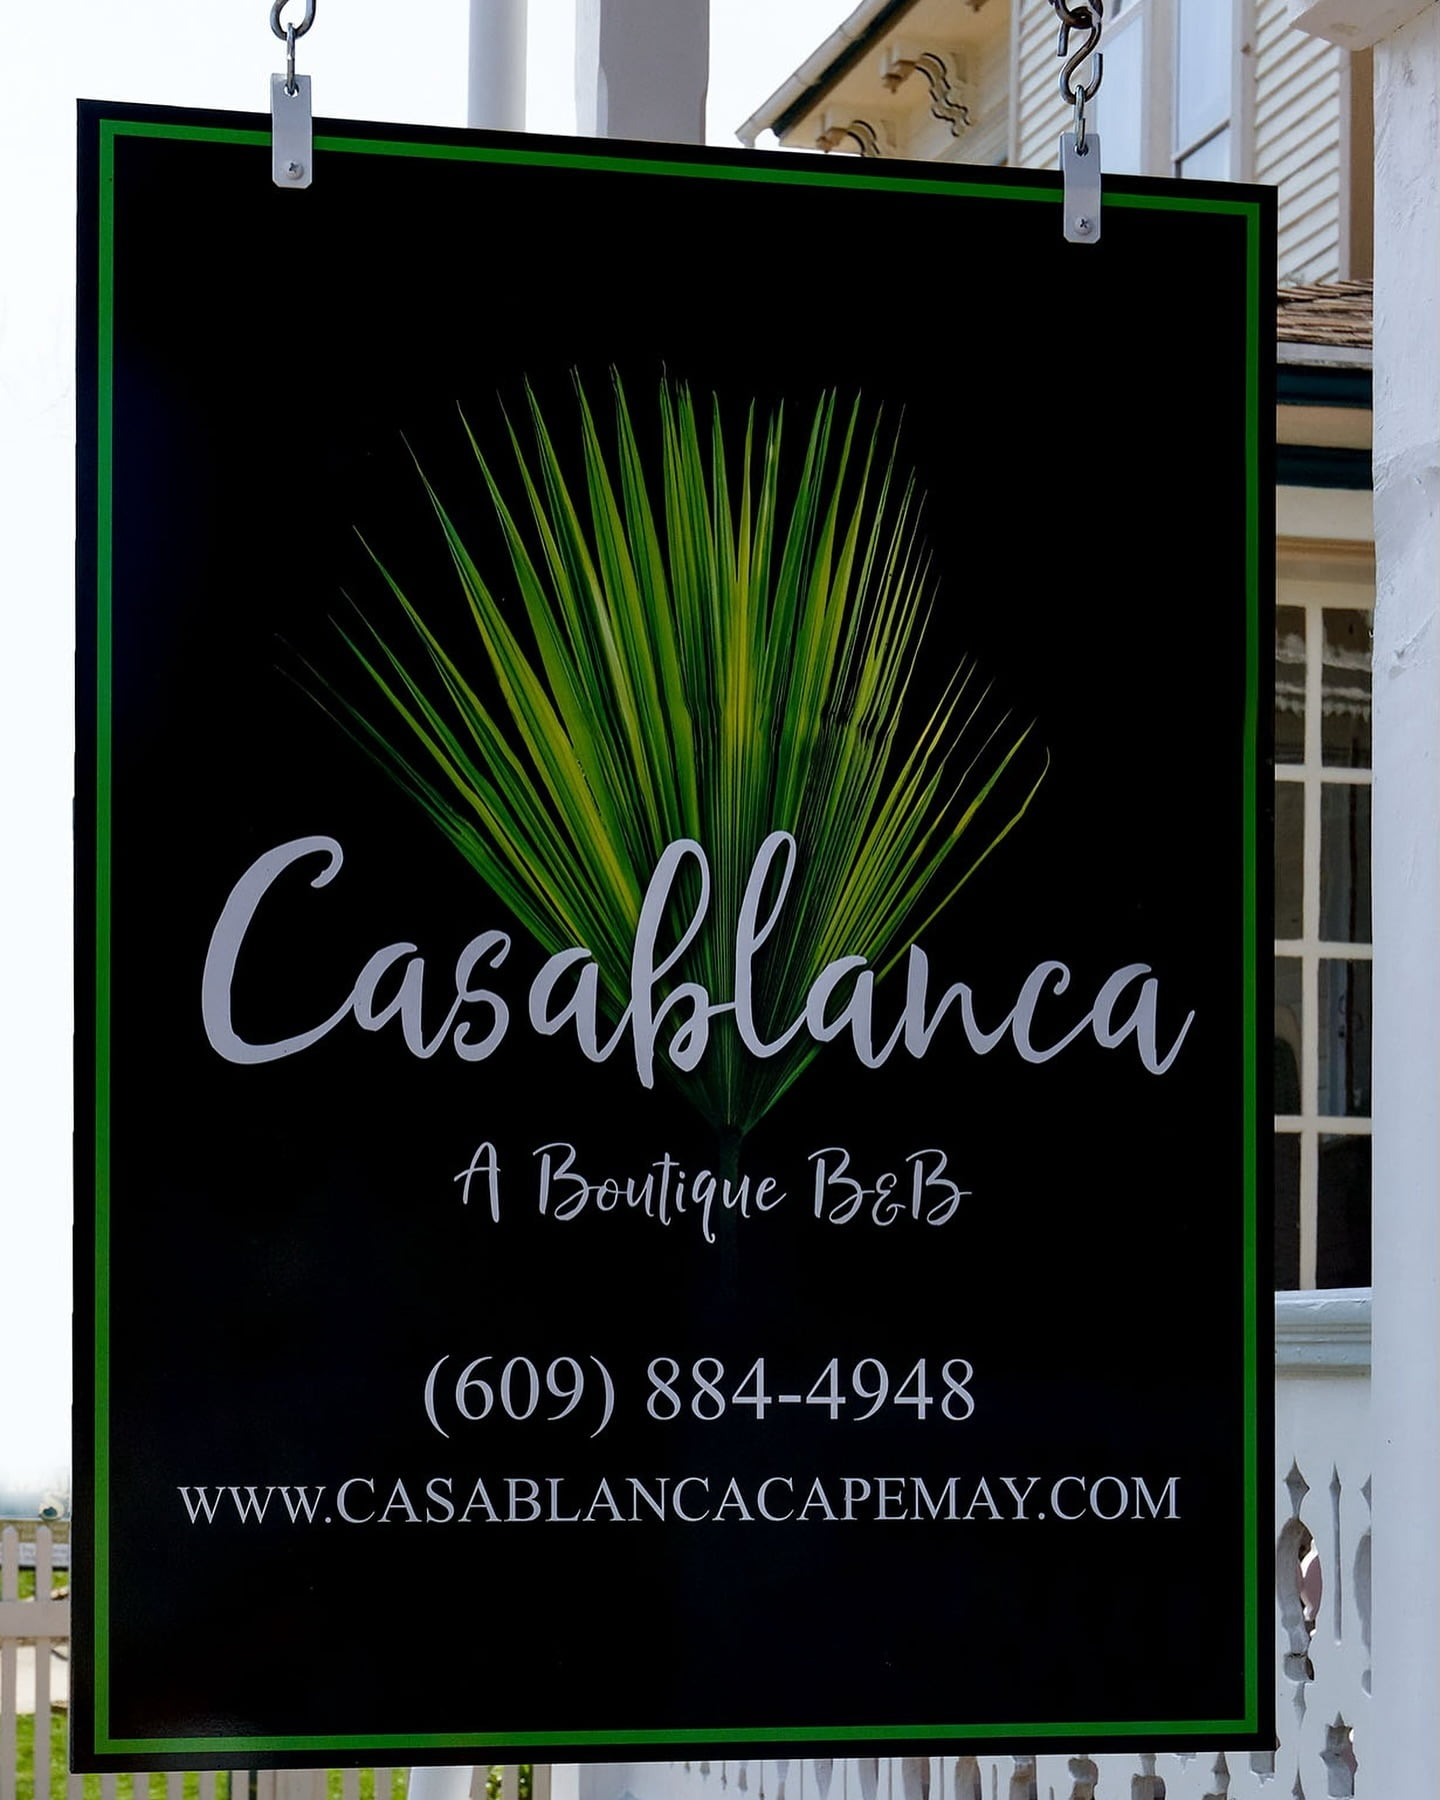 Book your spring stay at Casablanca and enjoy early season rates luxe accommodations and the ease of walkable access to all that downtown Cape May has to offer wwwCasablancaCapeMaycom